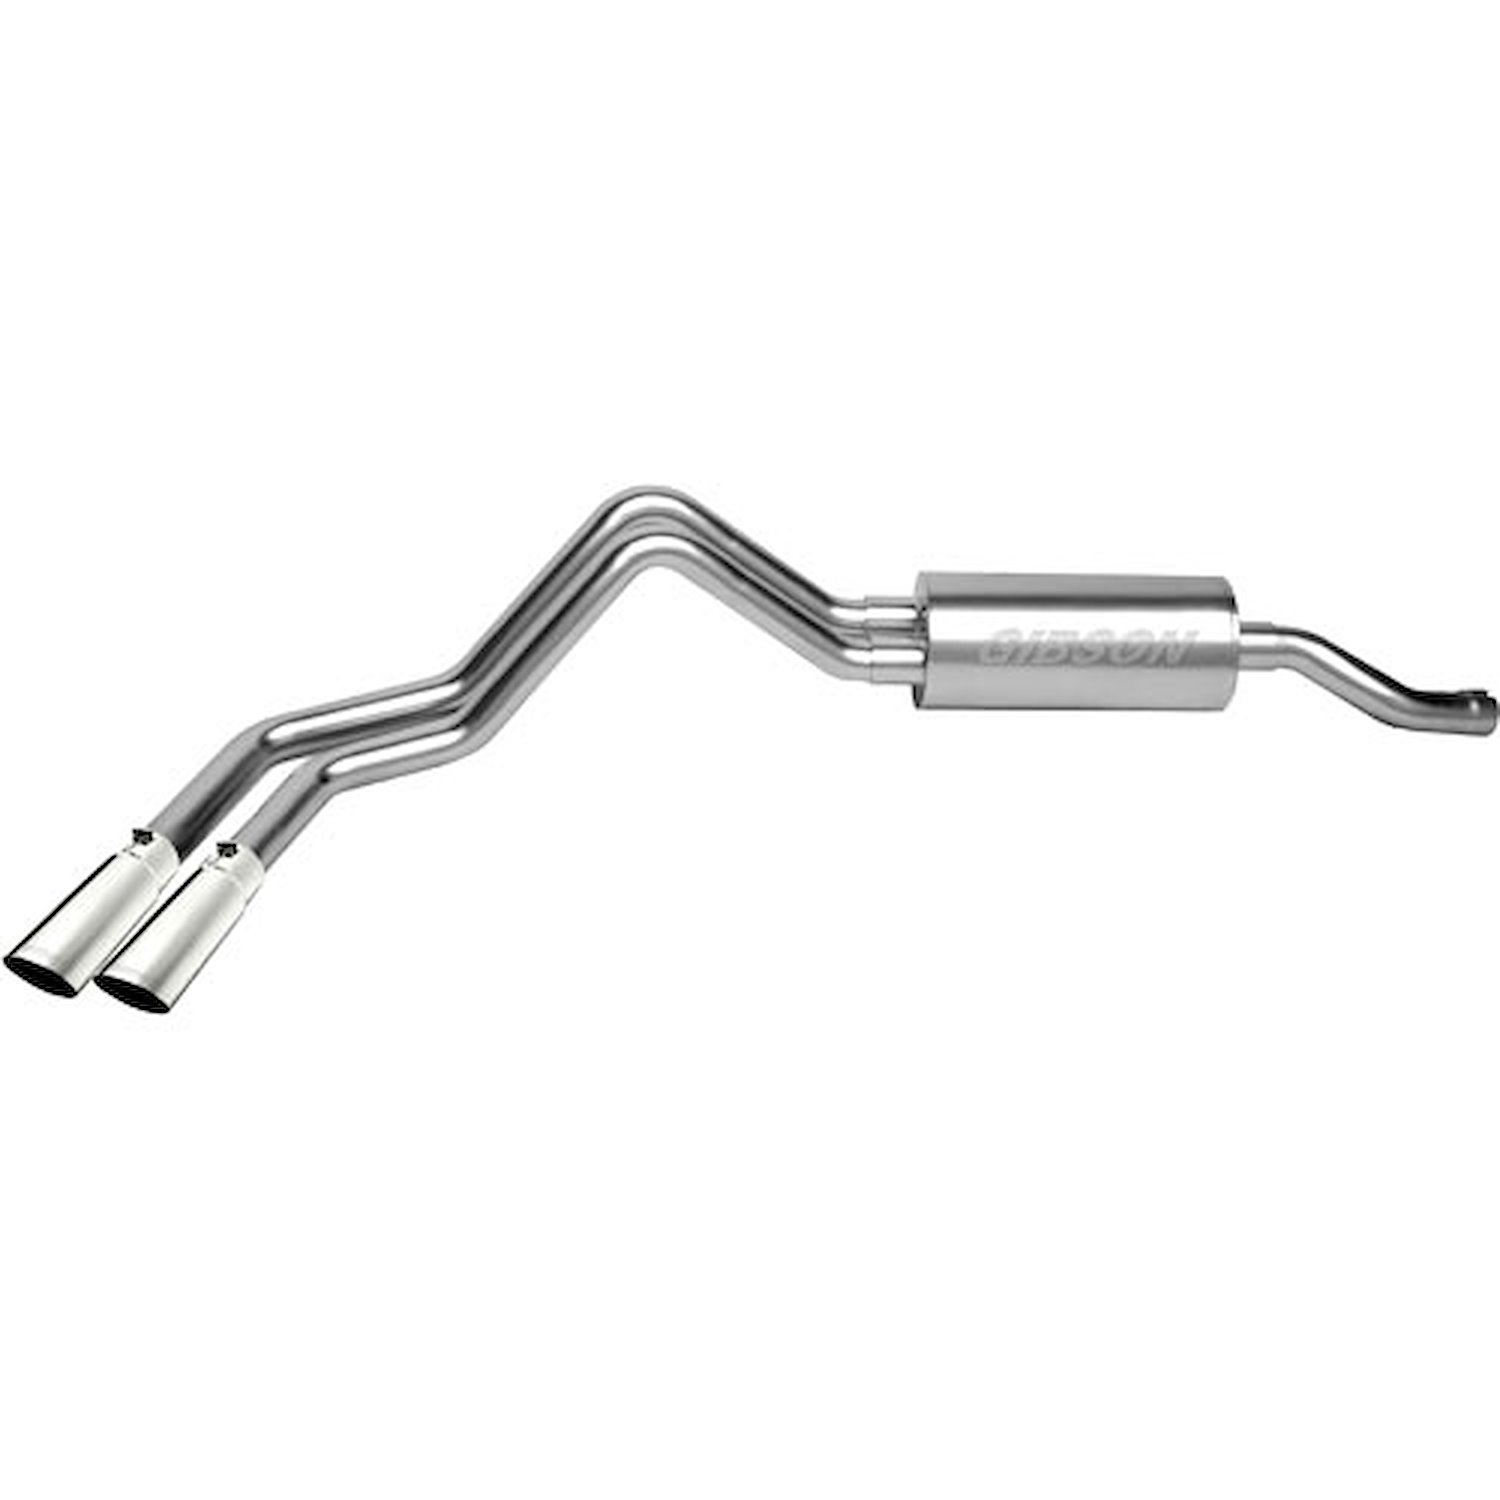 Dual Sport Cat-Back Exhaust 1998-2008 Ford Ranger 3.0L